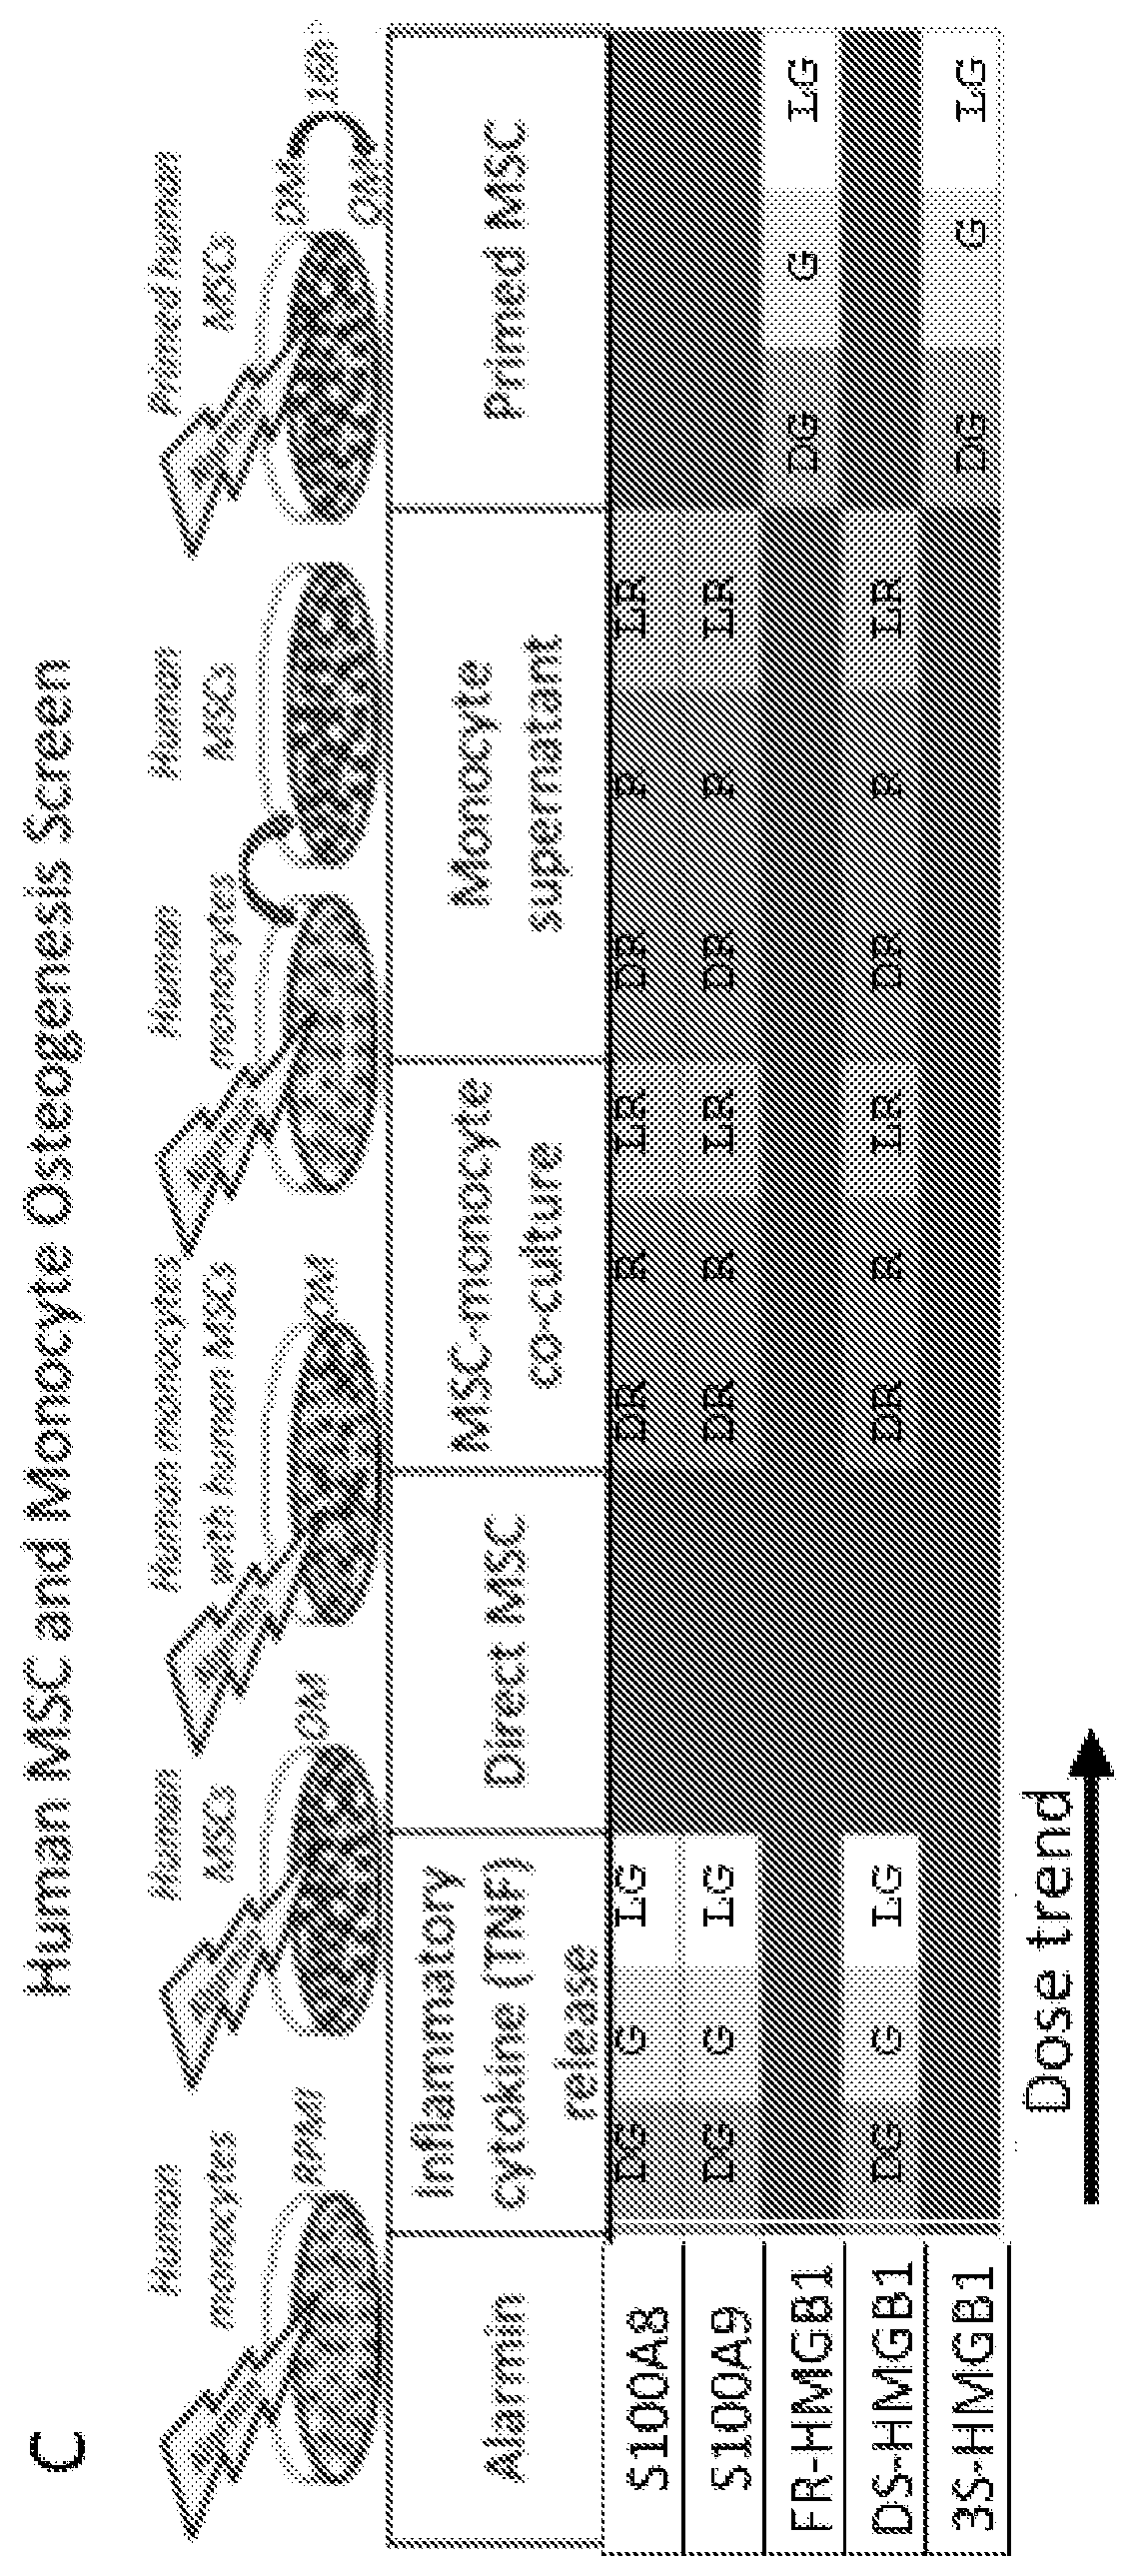 Prophylactic uses of partially or fully reduced forms of hmgb1 prior to injury